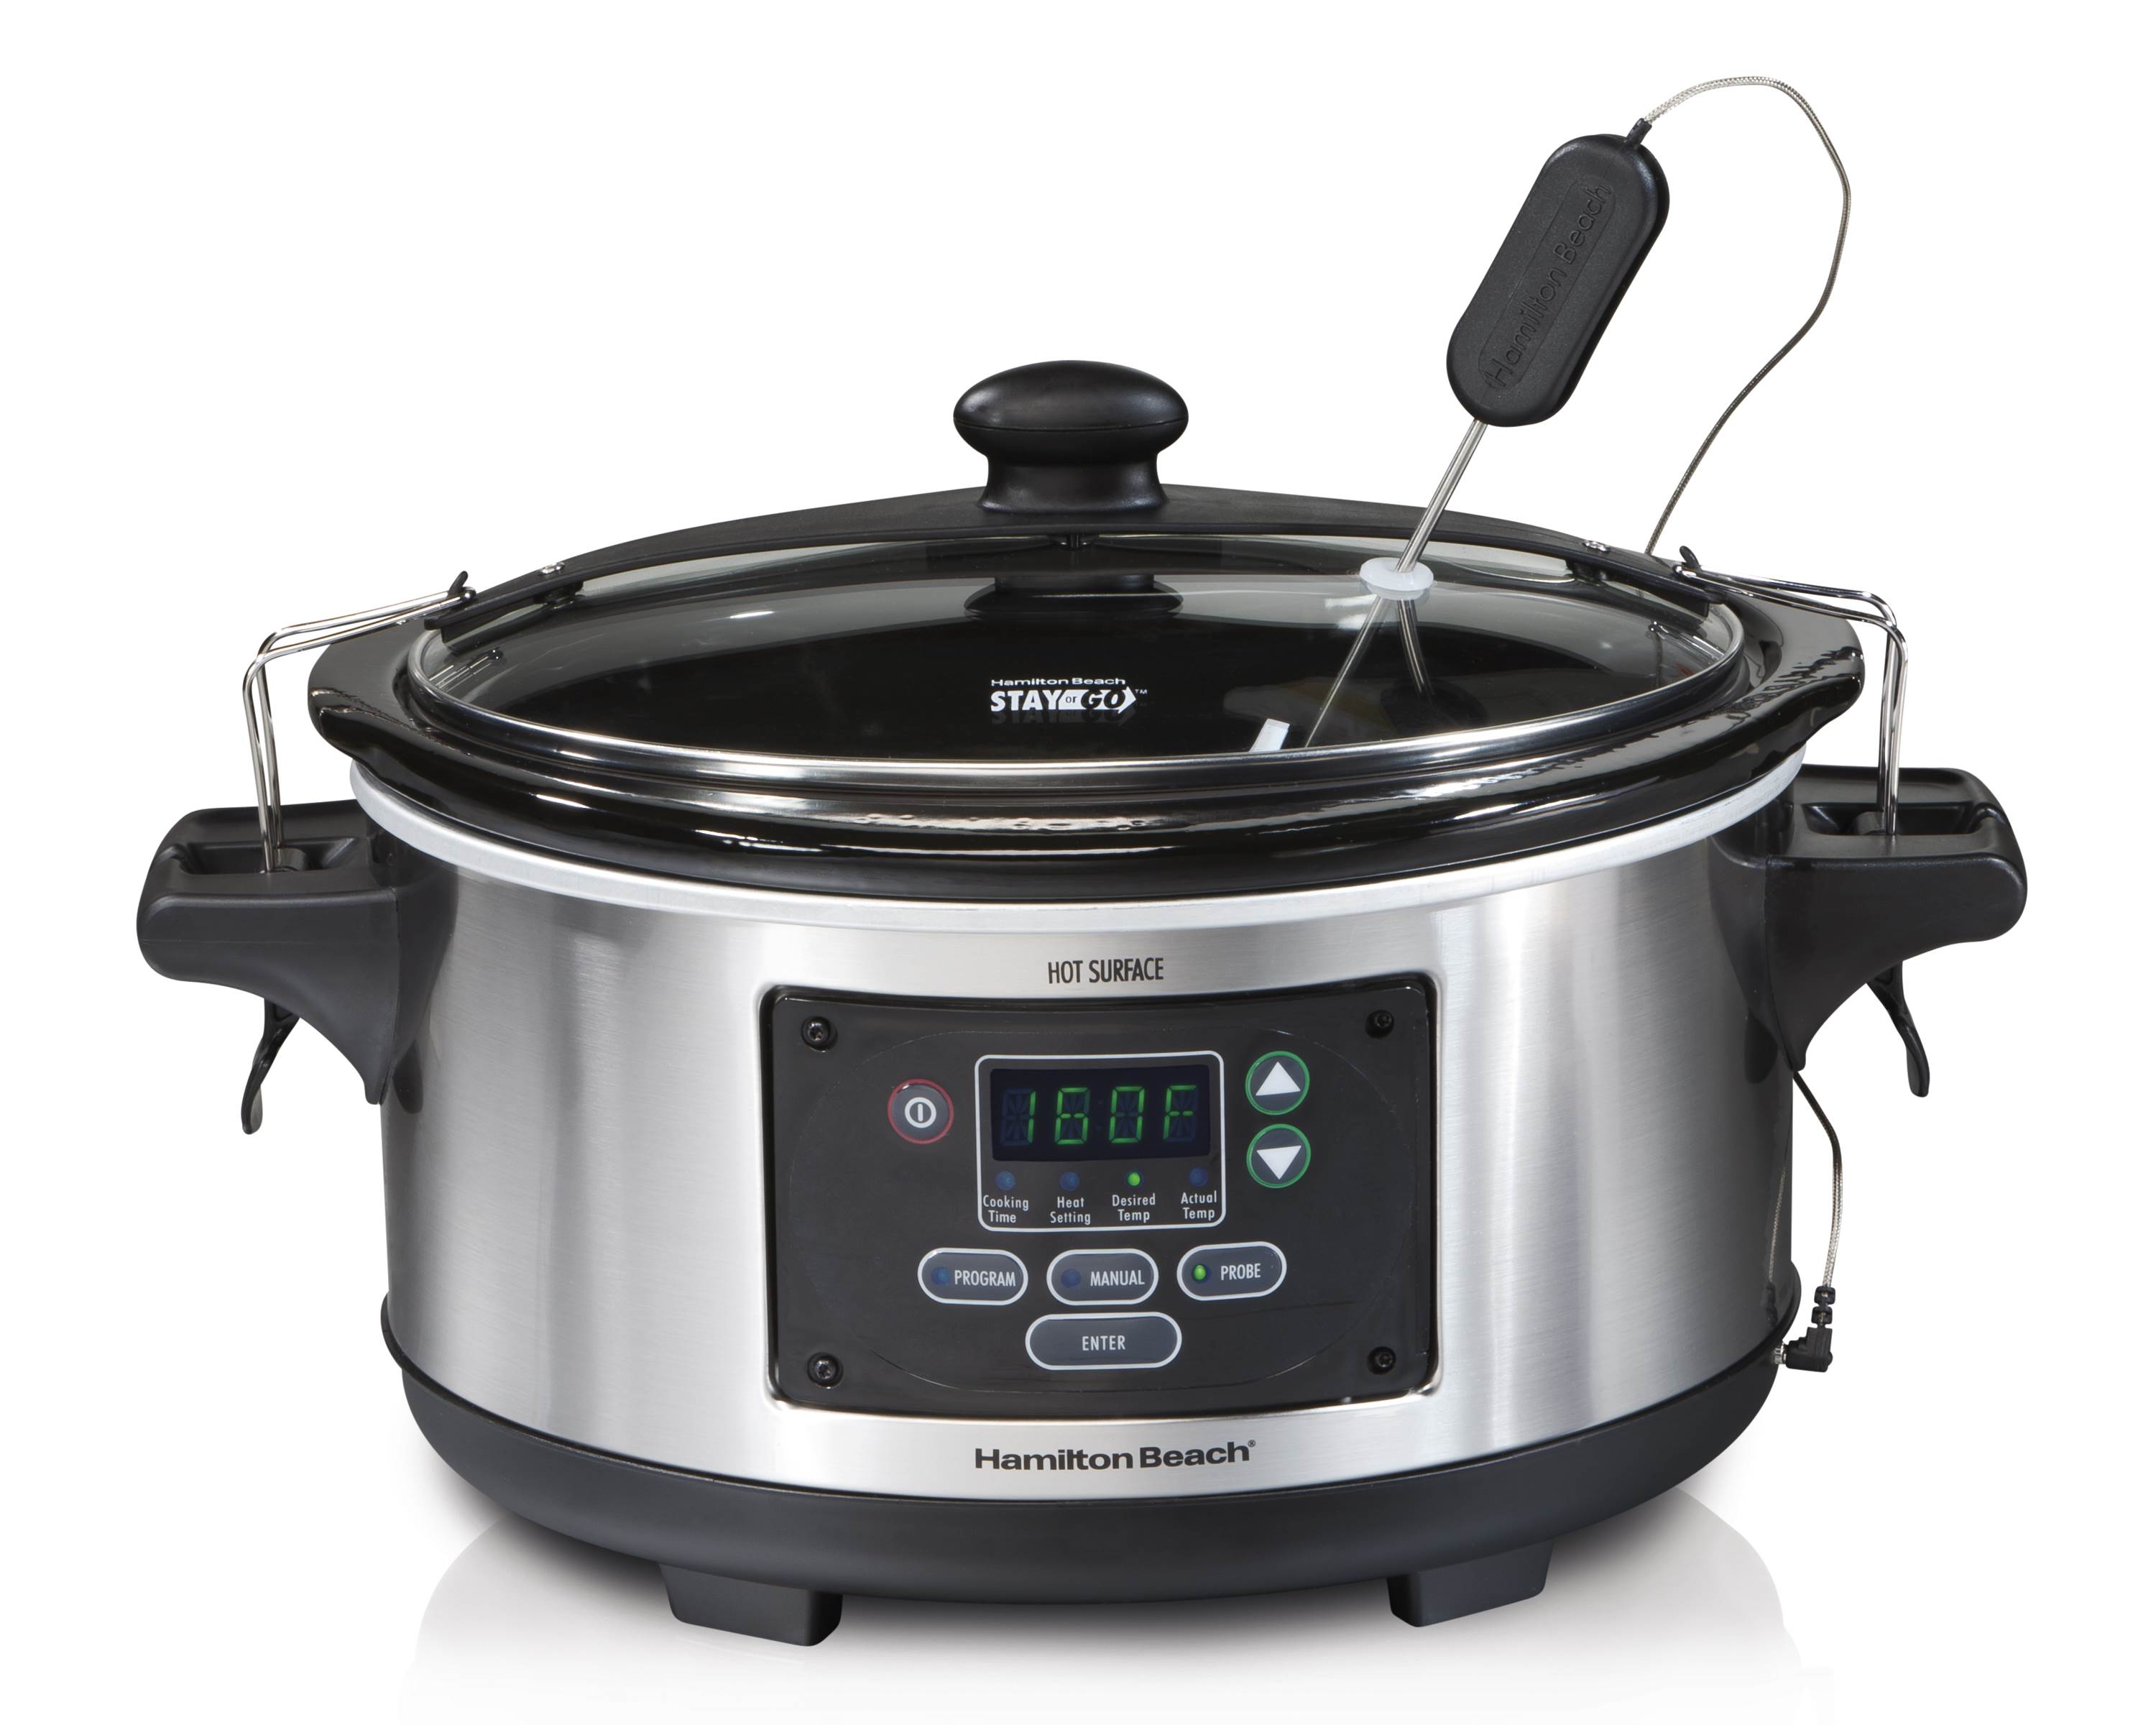 Hamilton Beach Set & Forget 6 qt. Brushed Metallic Programmable Slow Cooker - image 3 of 11